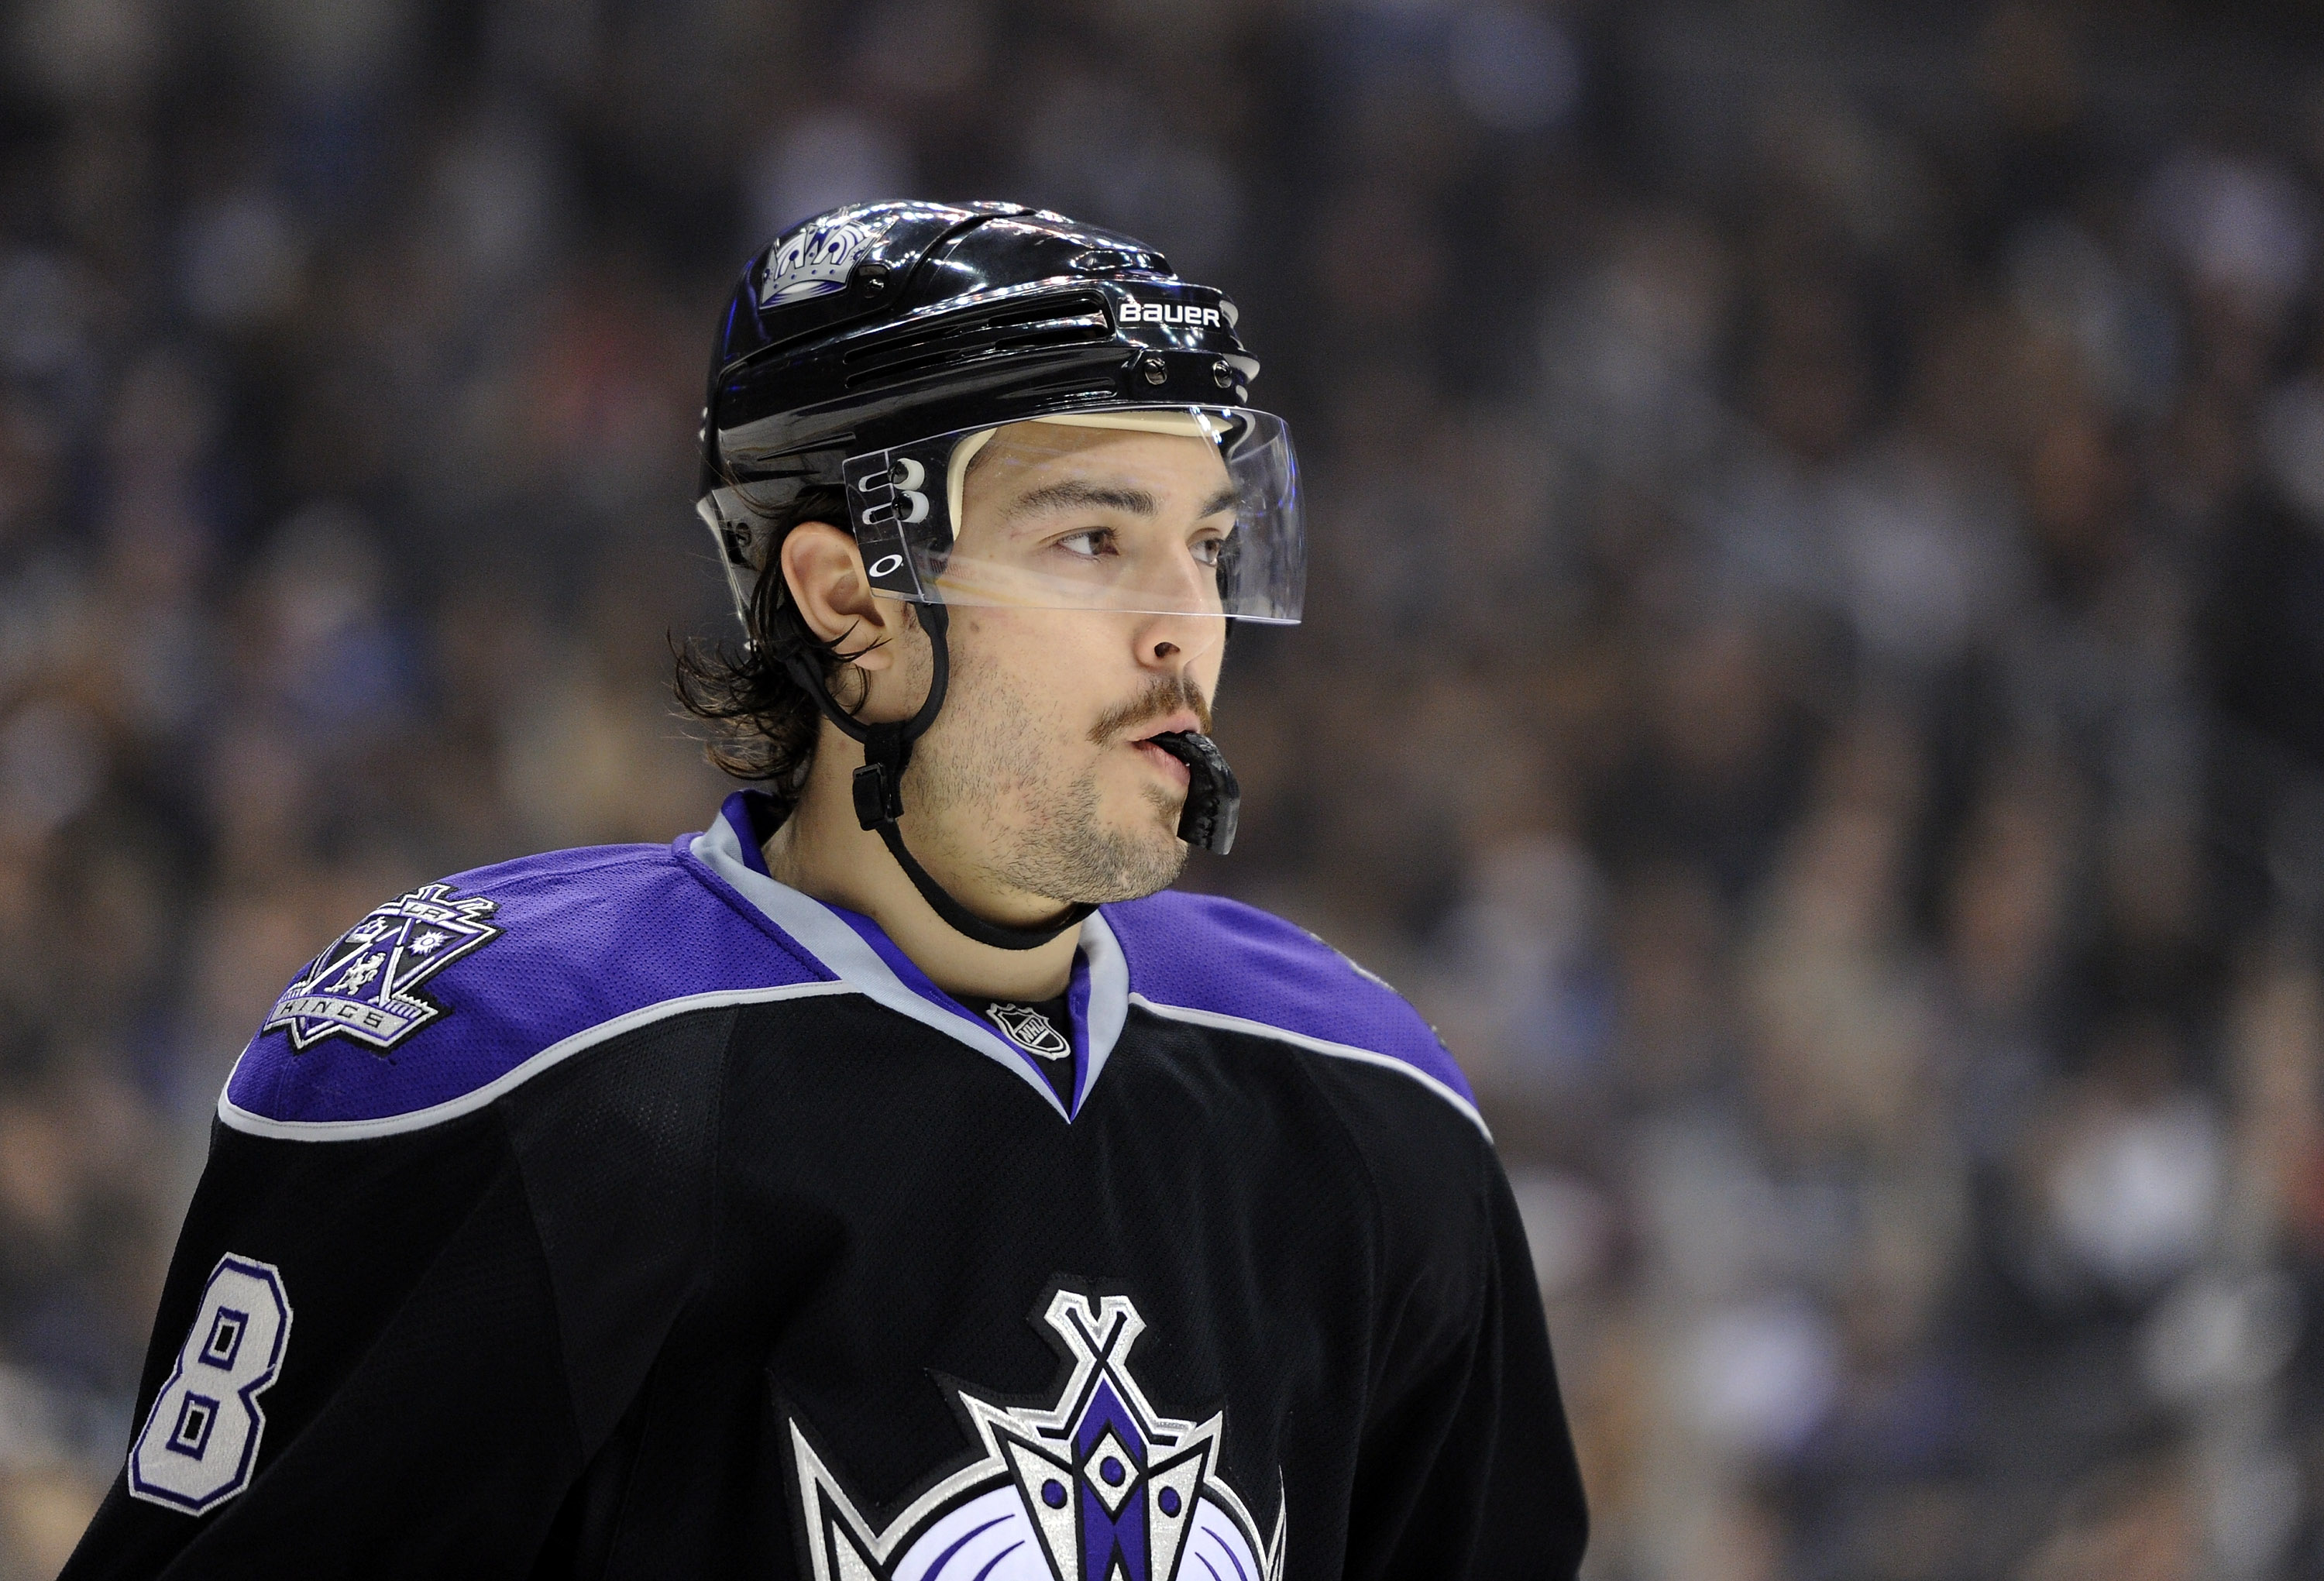 LOS ANGELES, CA - NOVEMBER 27:  Drew Doughty #8 of the Los Angeles Kings waits before the syart of the game against the Chicago Blackhawks at Staples Center on November 27, 2010 in Los Angeles, California.  (Photo by Harry How/Getty Images)